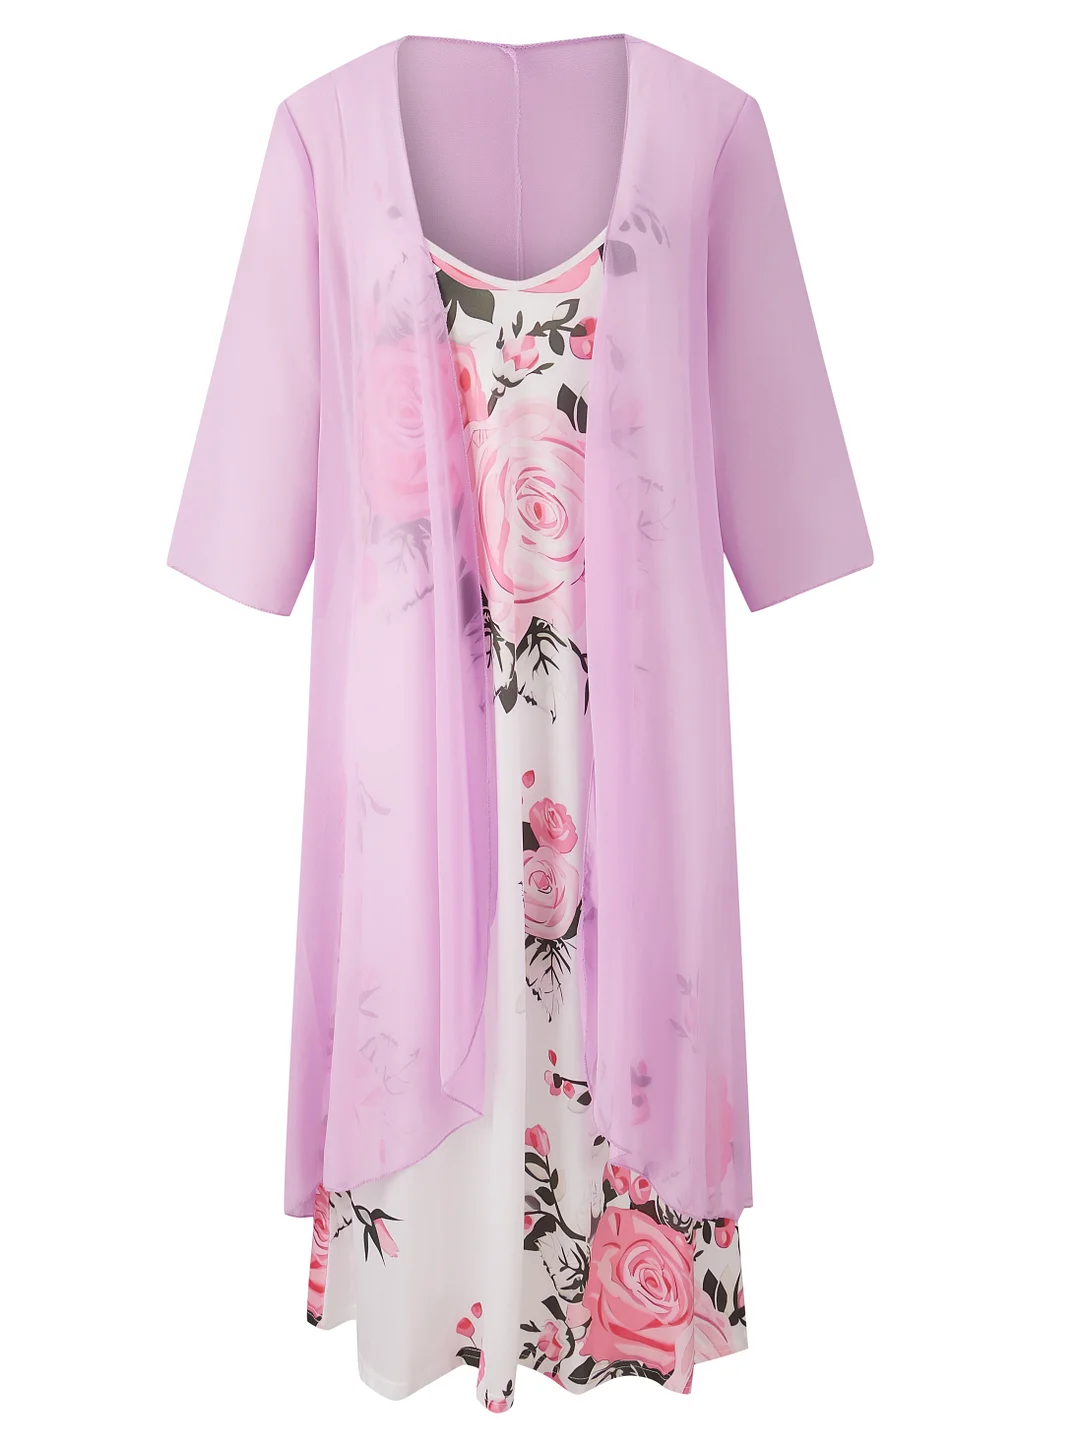 Style & Comfort for Mature Women Women Long Sleeve V-neck Floral Printed Two-Piece Midi Dress